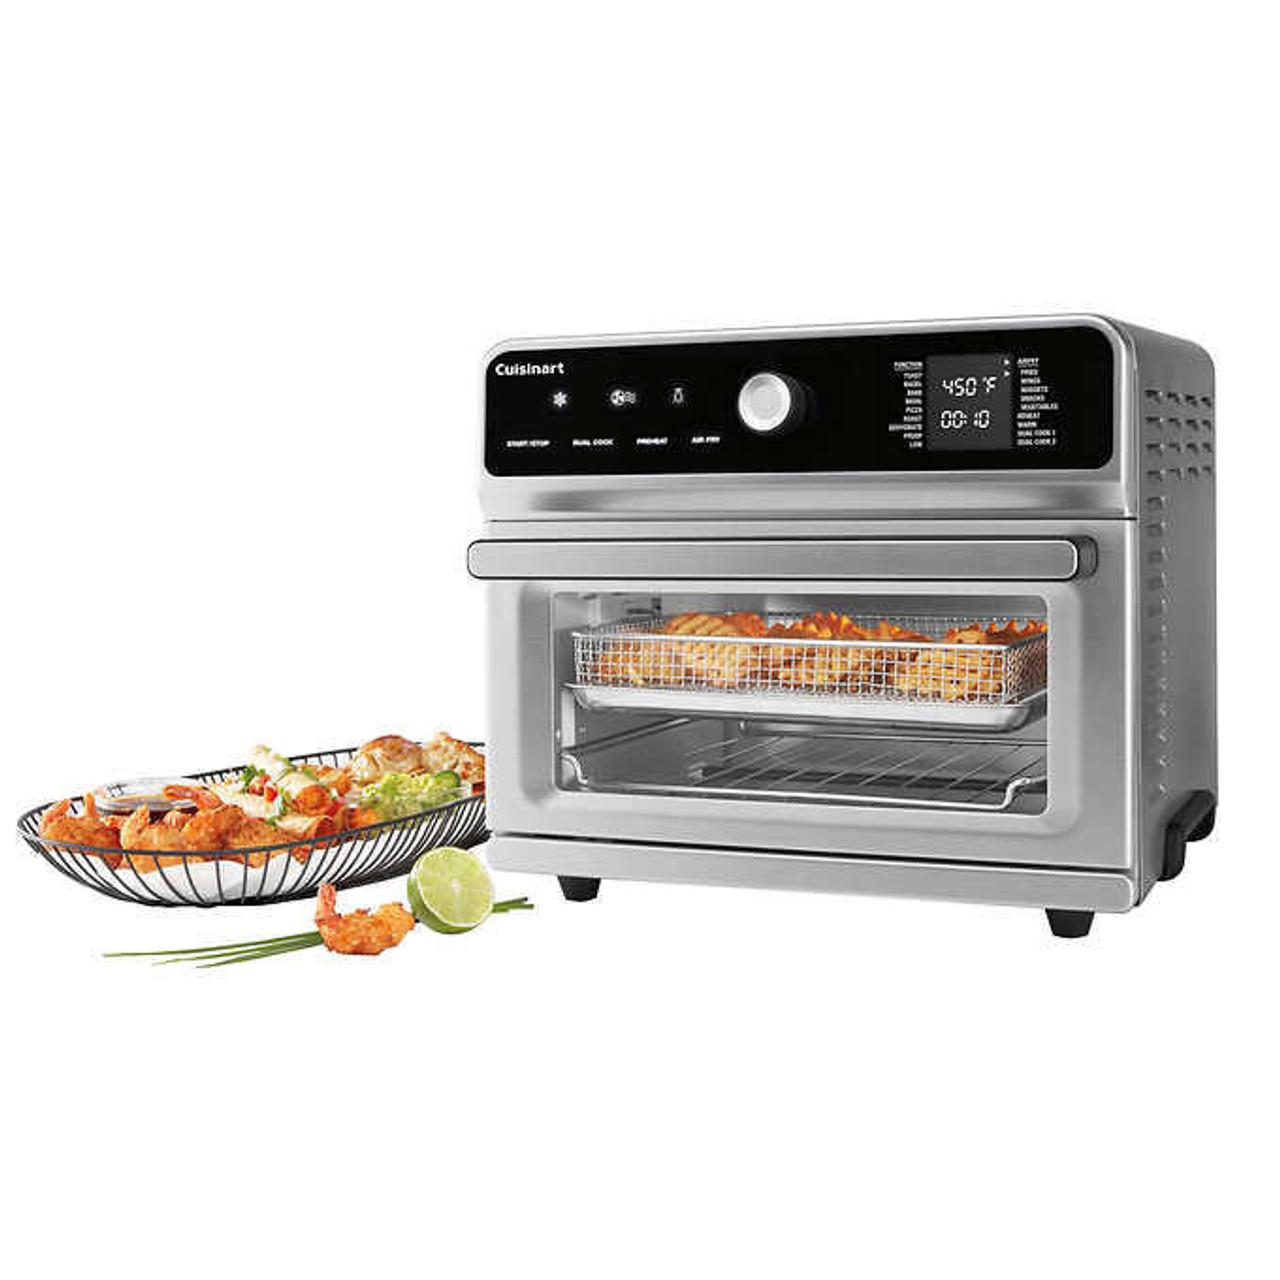 https://cdn11.bigcommerce.com/s-g5ygv2at8j/images/stencil/1280x1280/products/13779/31870/cuisinart-digital-air-fryer-convection-toaster-oven__01254.1694498529.jpg?c=1